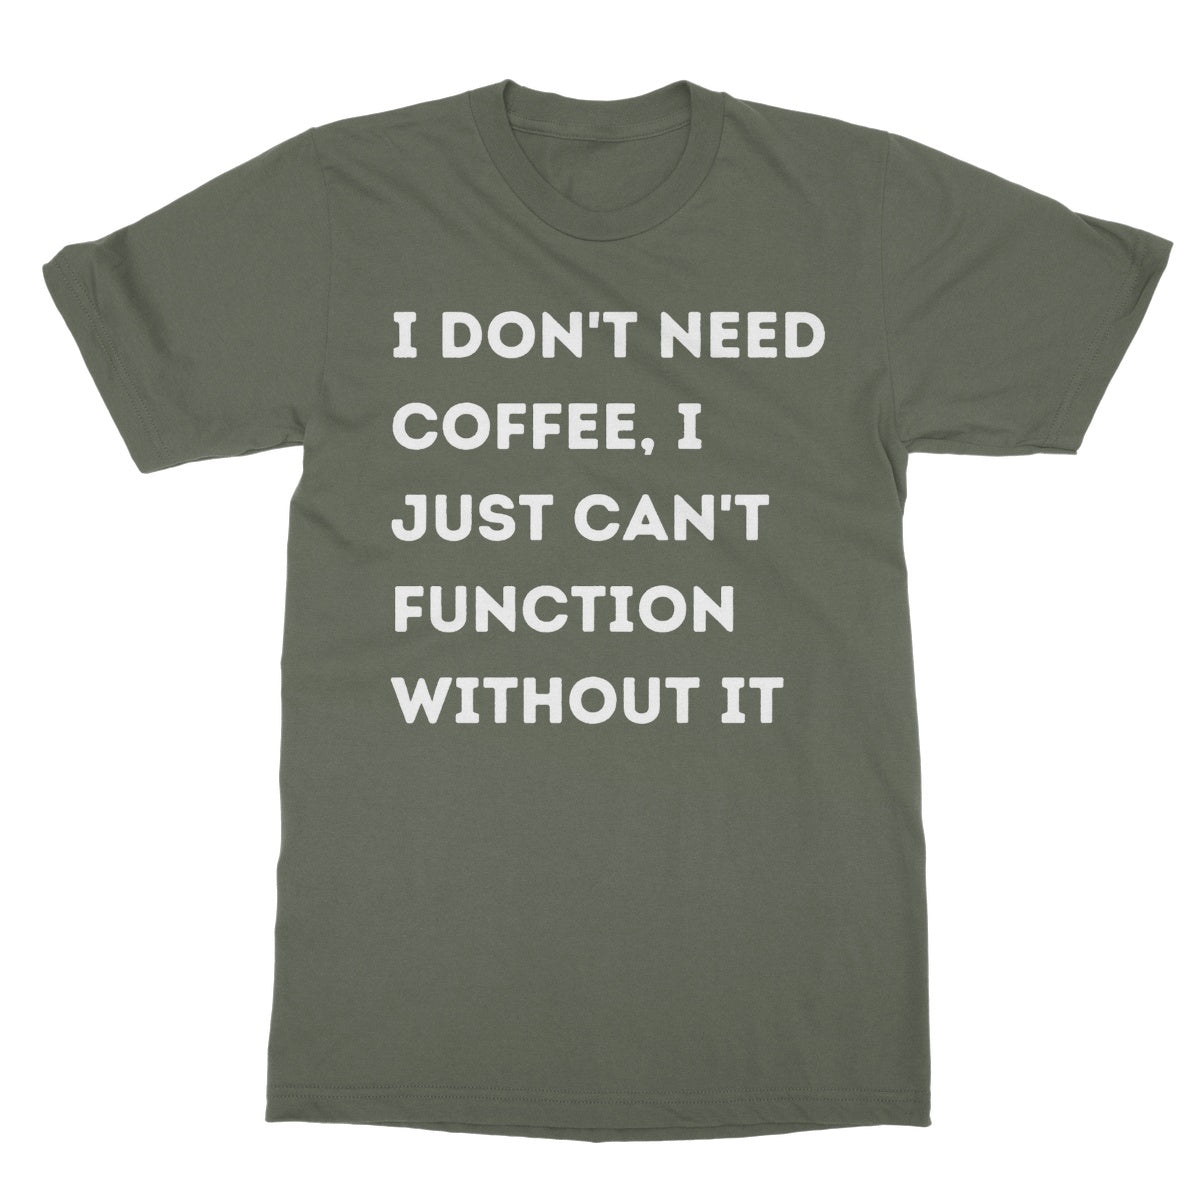 I can't function without coffee t shirt green